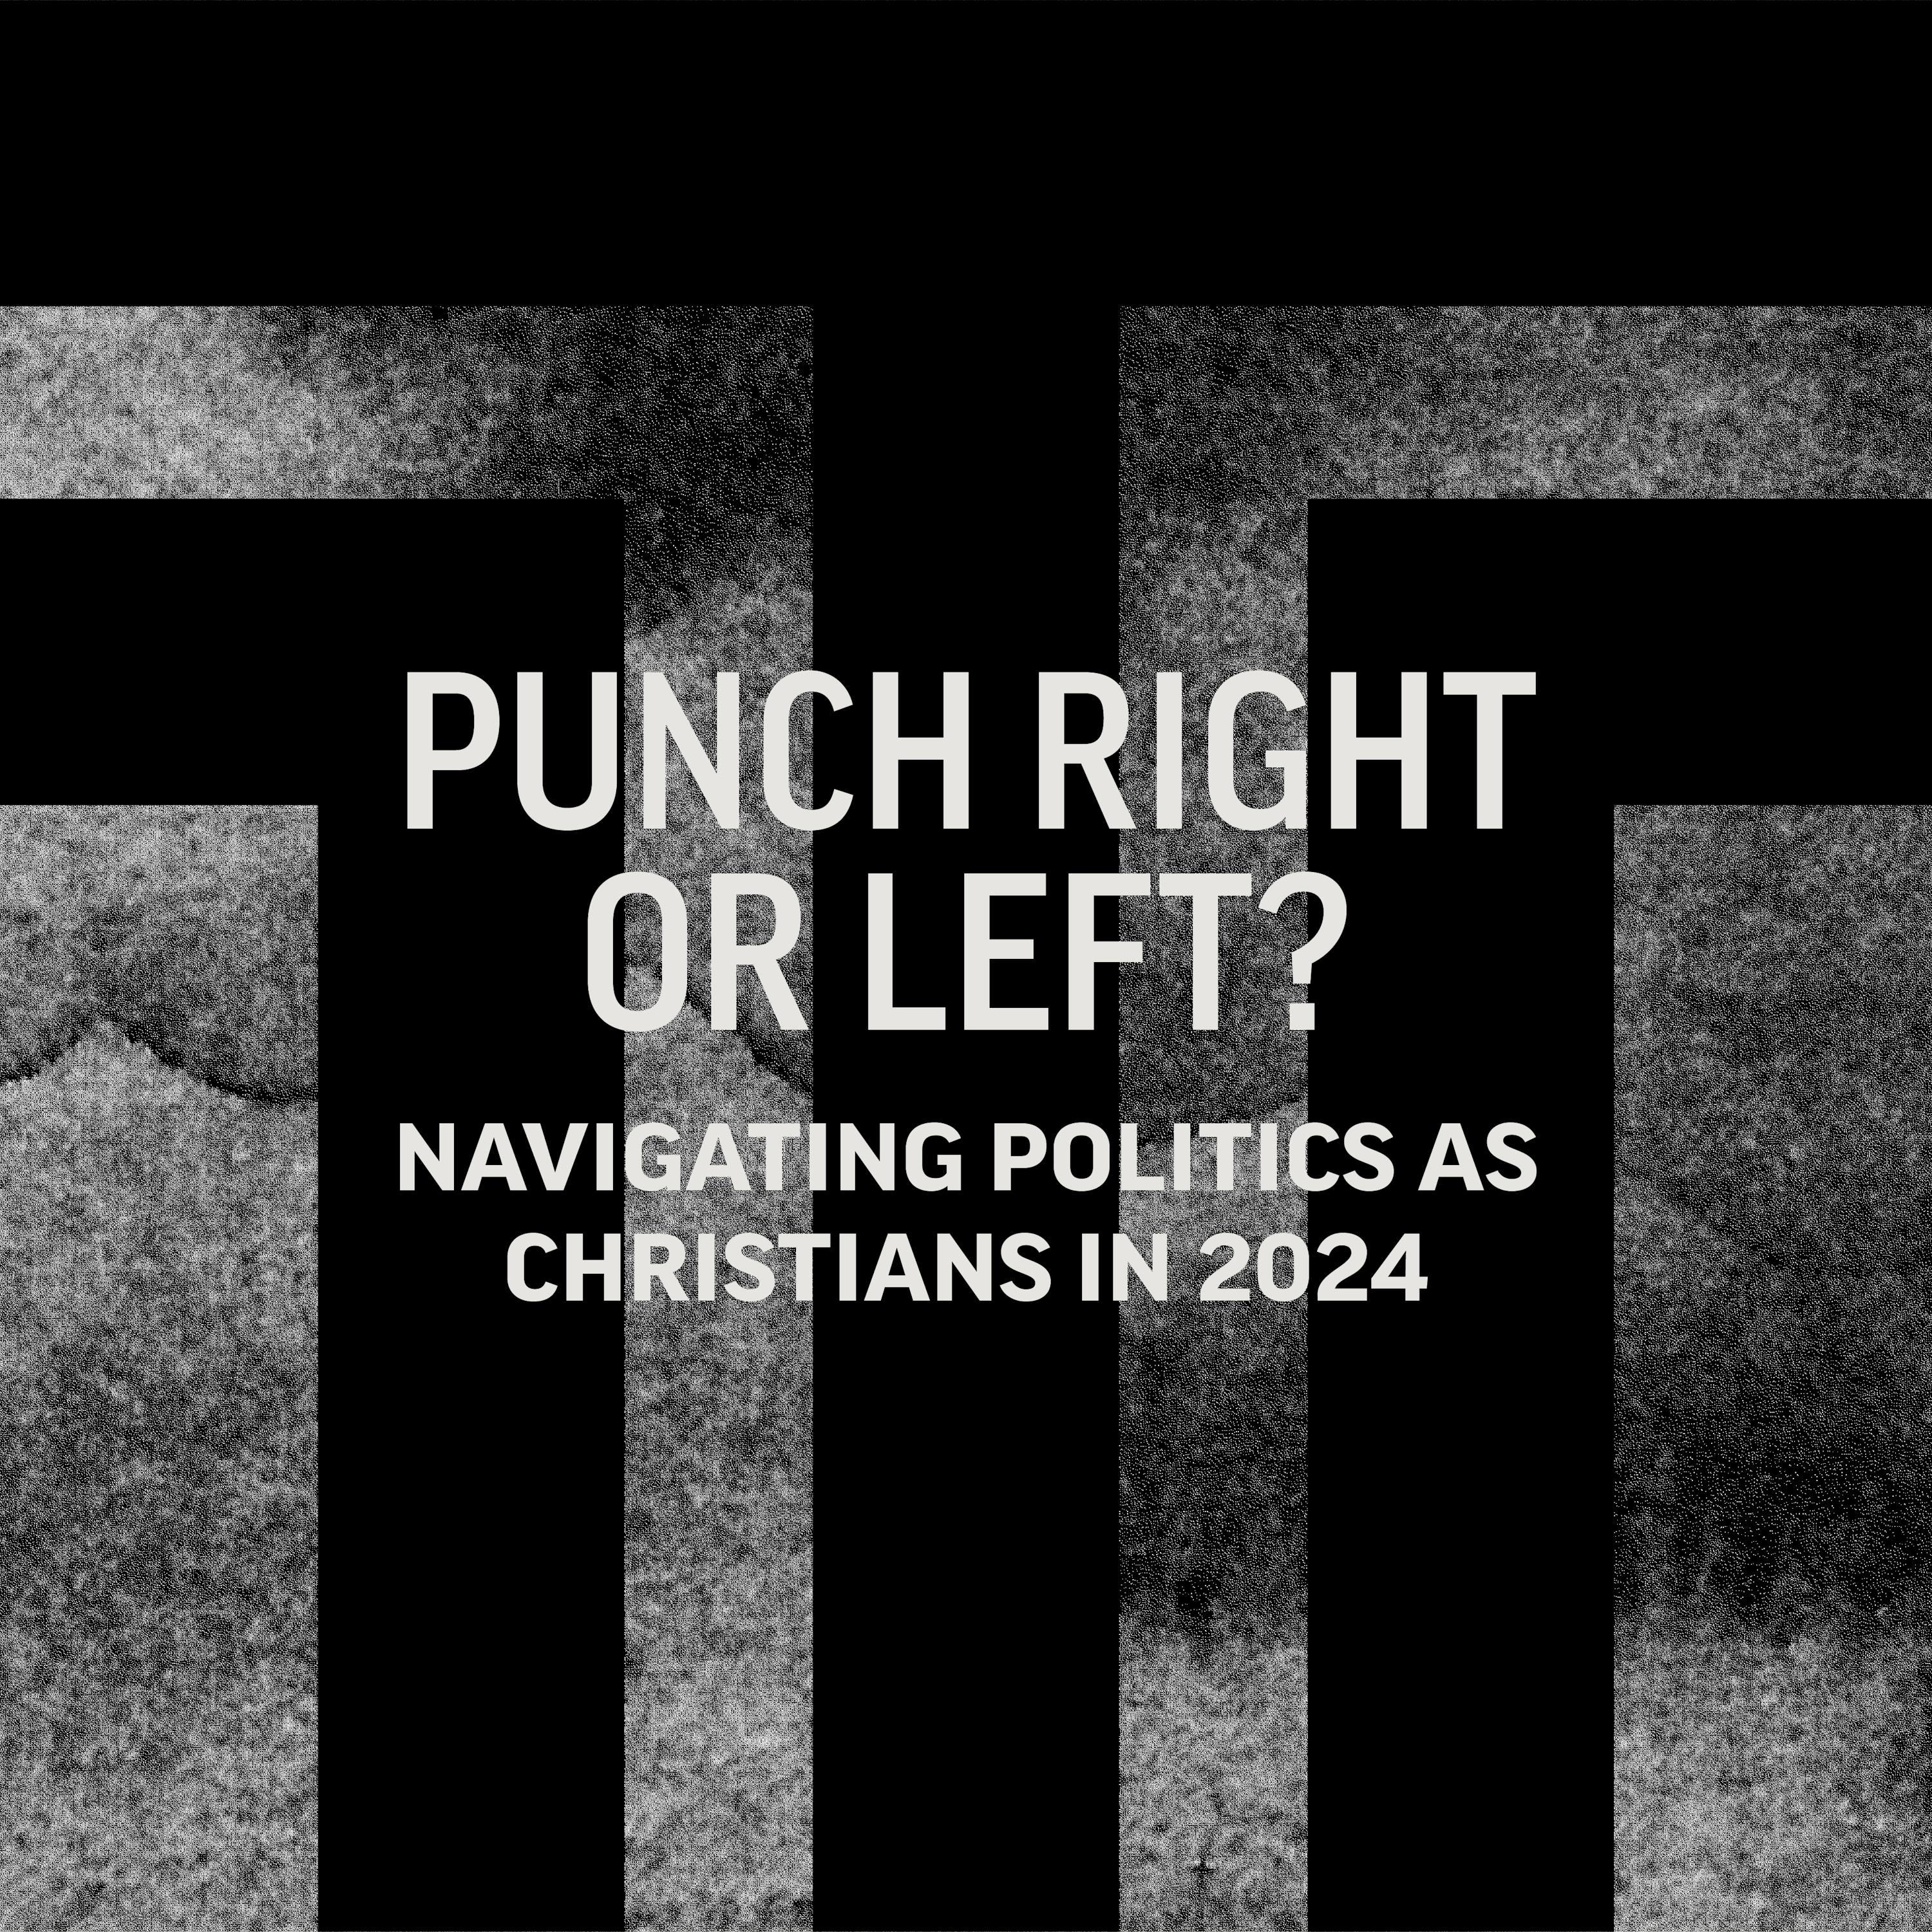 Punch Right or Left? Navigating Politics as Christians in 2024